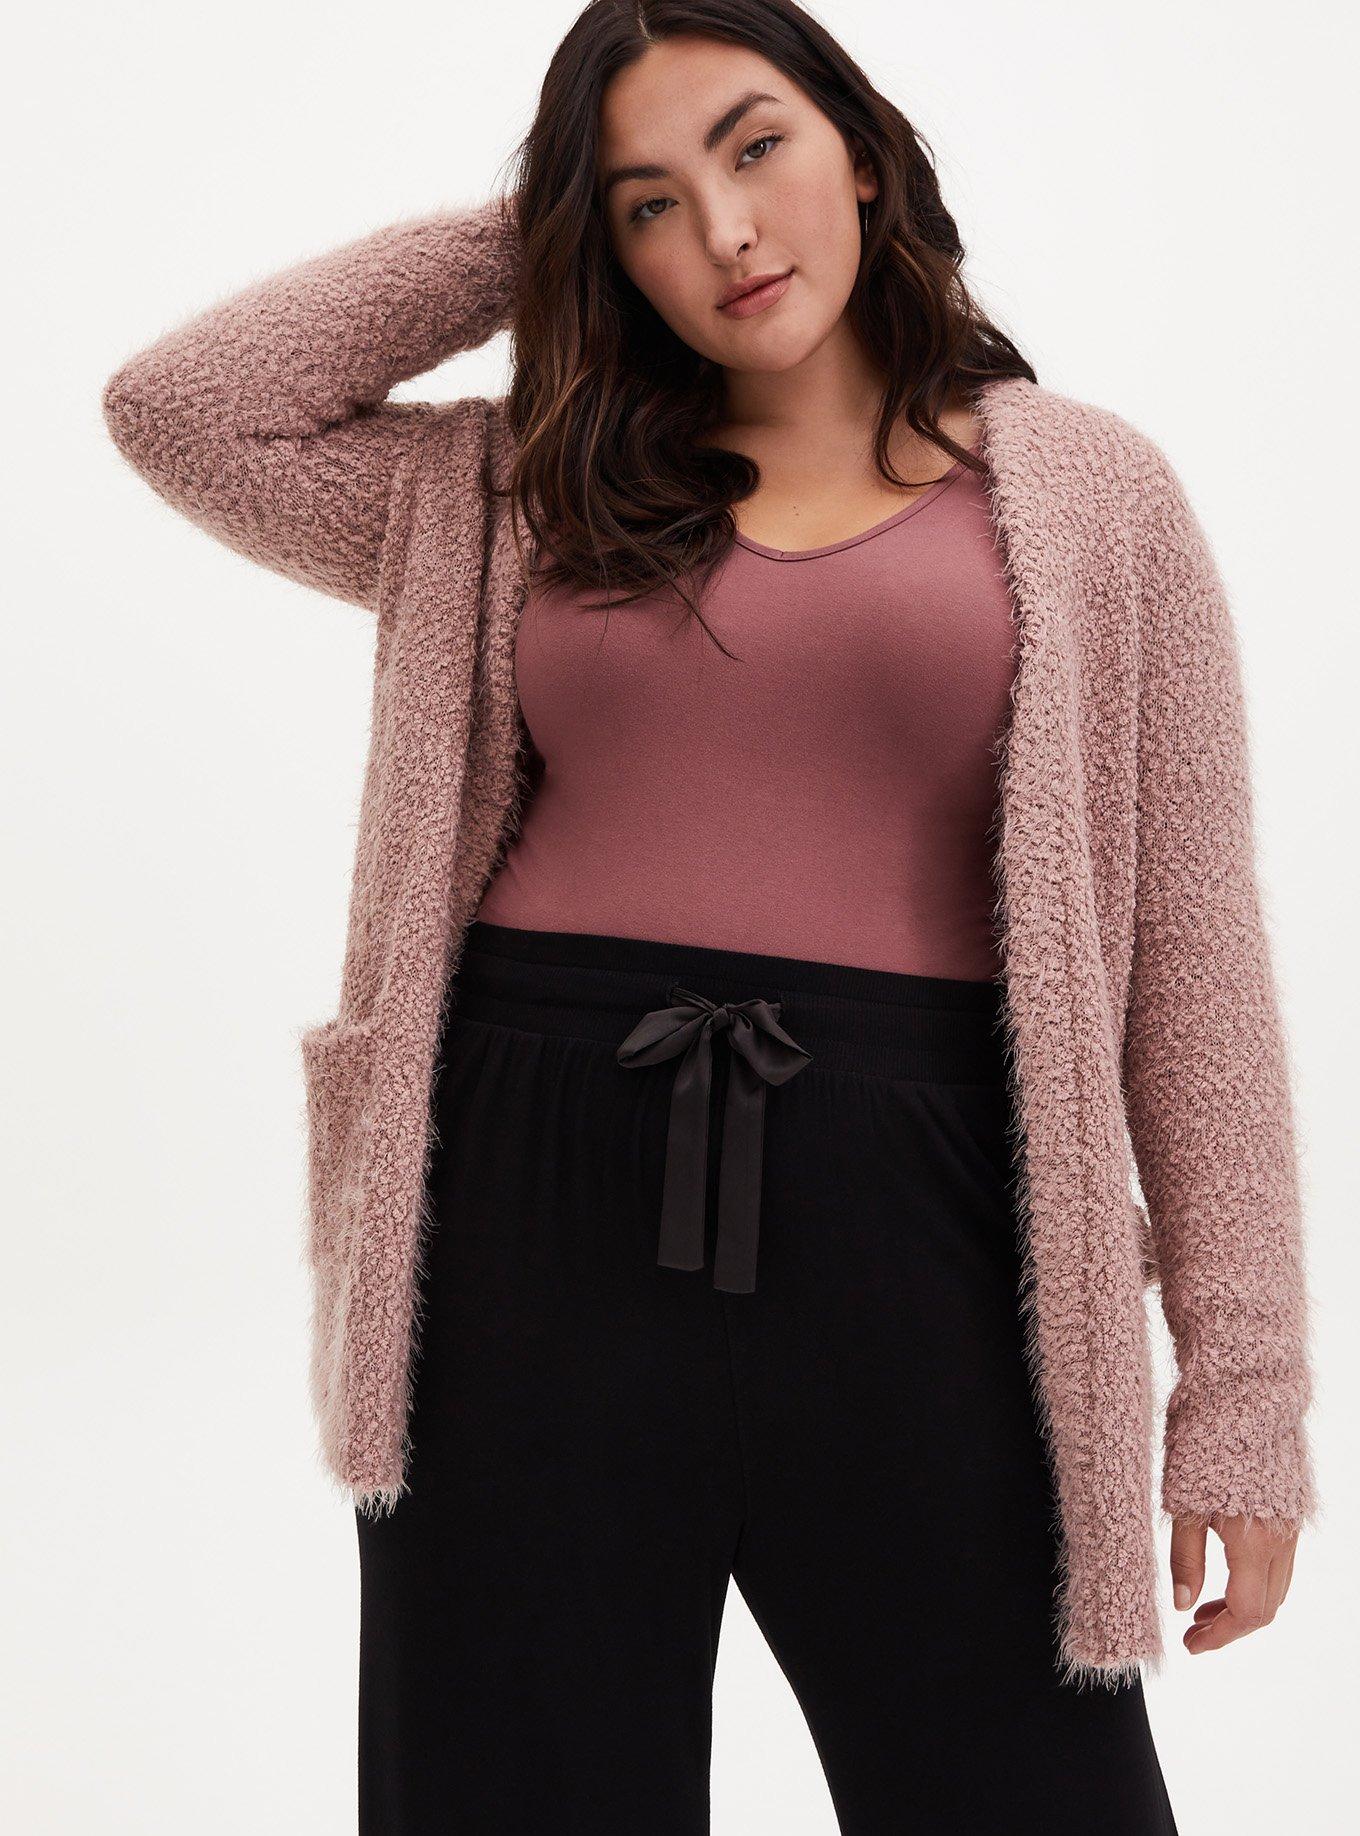 Women's Fluffy Sweaters, Explore our New Arrivals